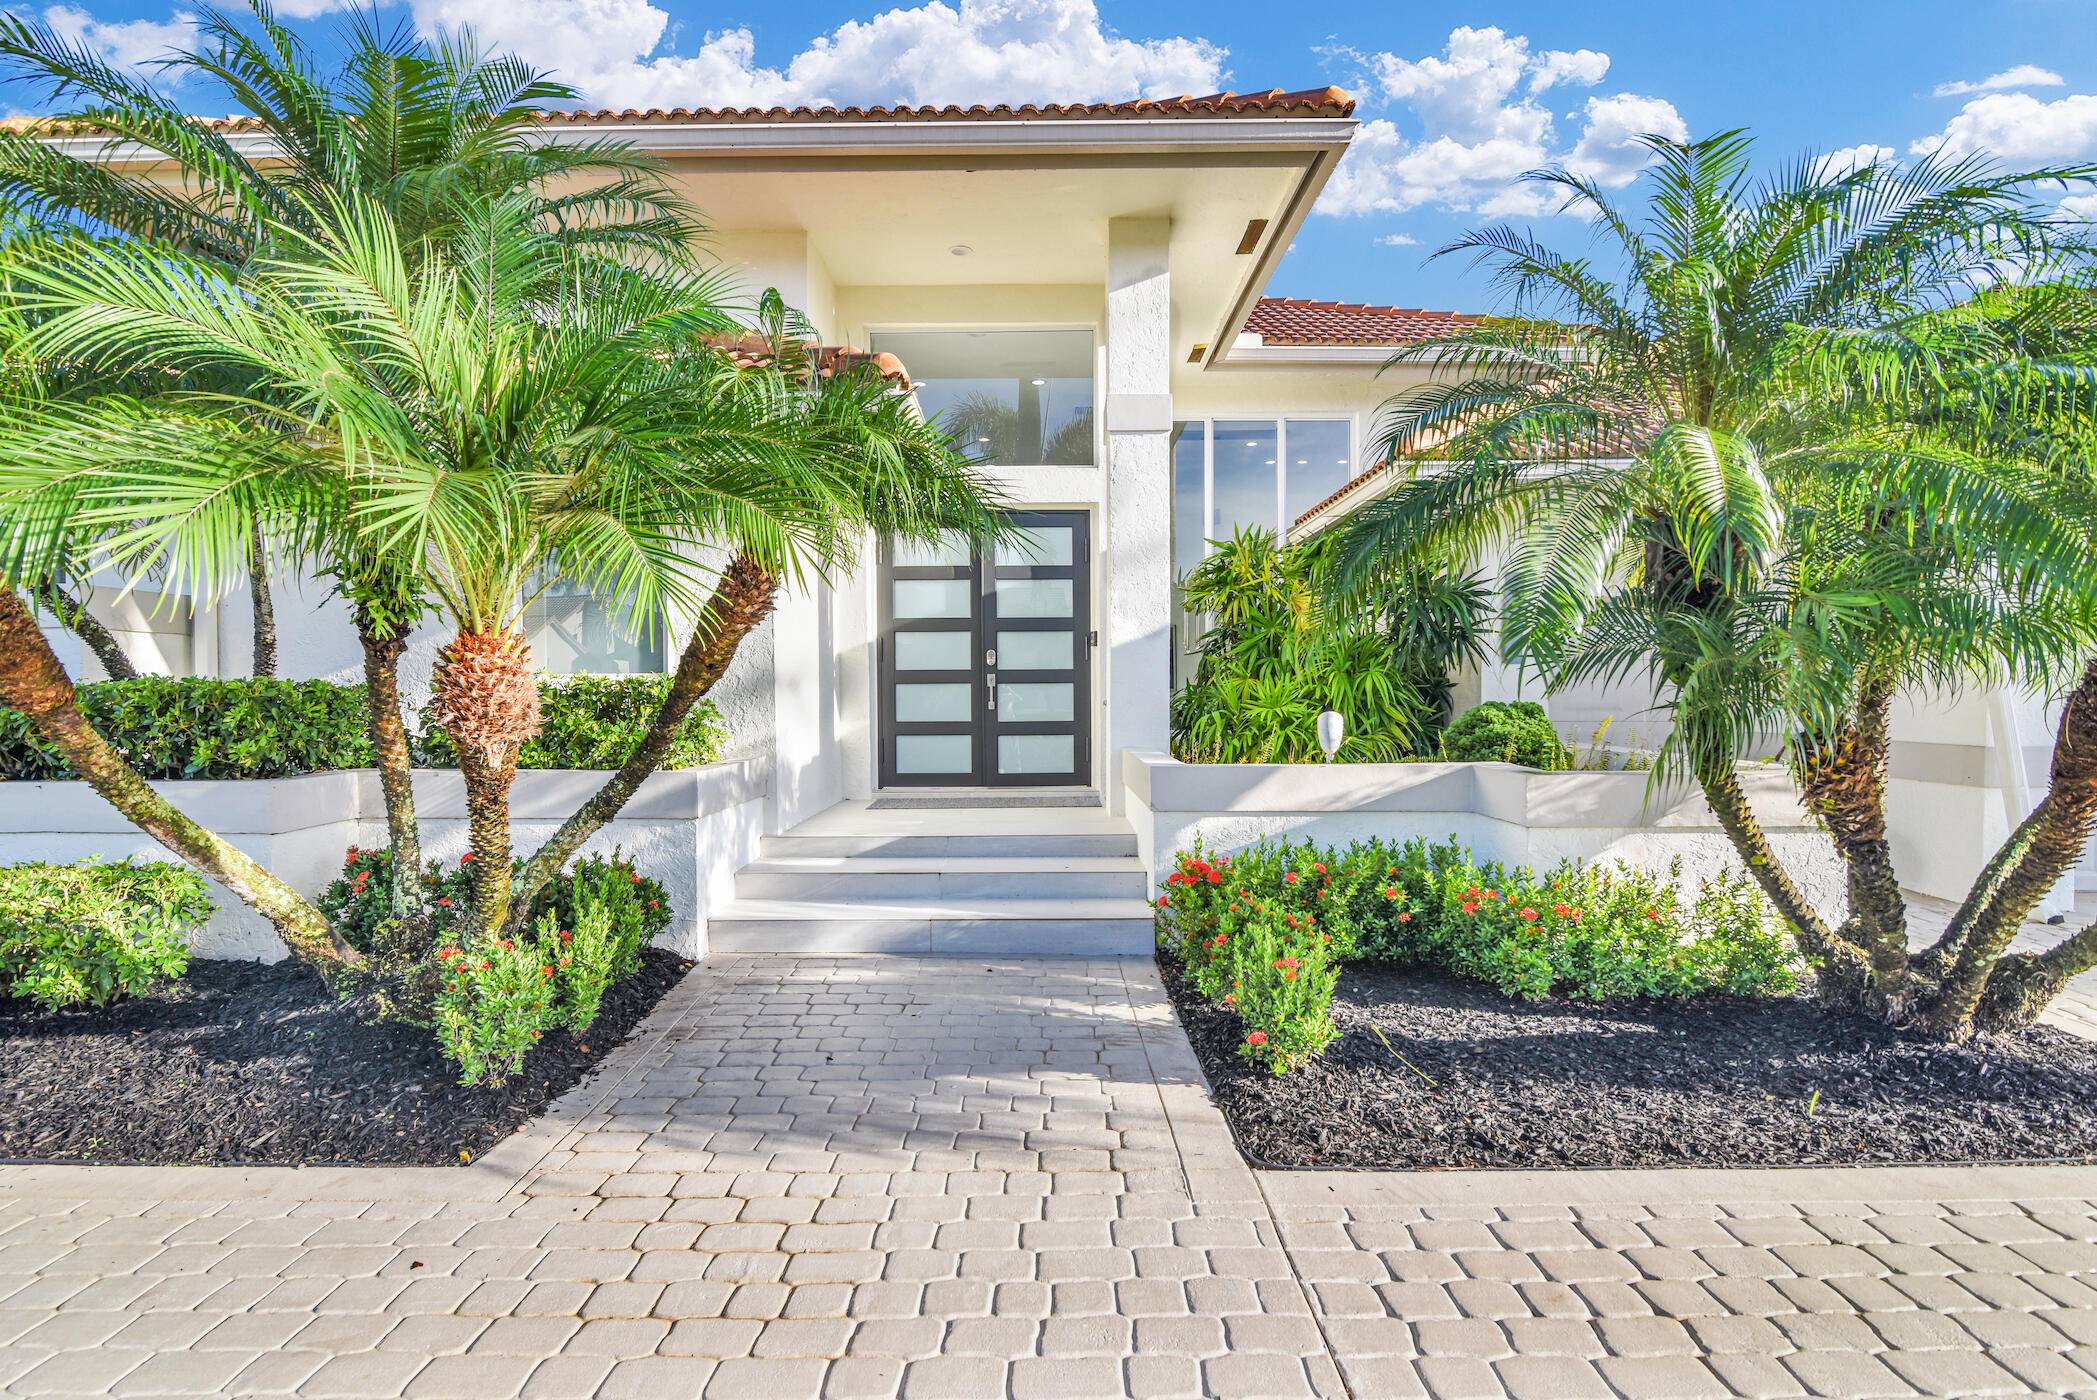 Thoroughly and thoughtfully renovated over a two year period, this extraordinary property wasdeveloped by one of Boca's premier designer builders, and transformed into an oasis of modernliving.